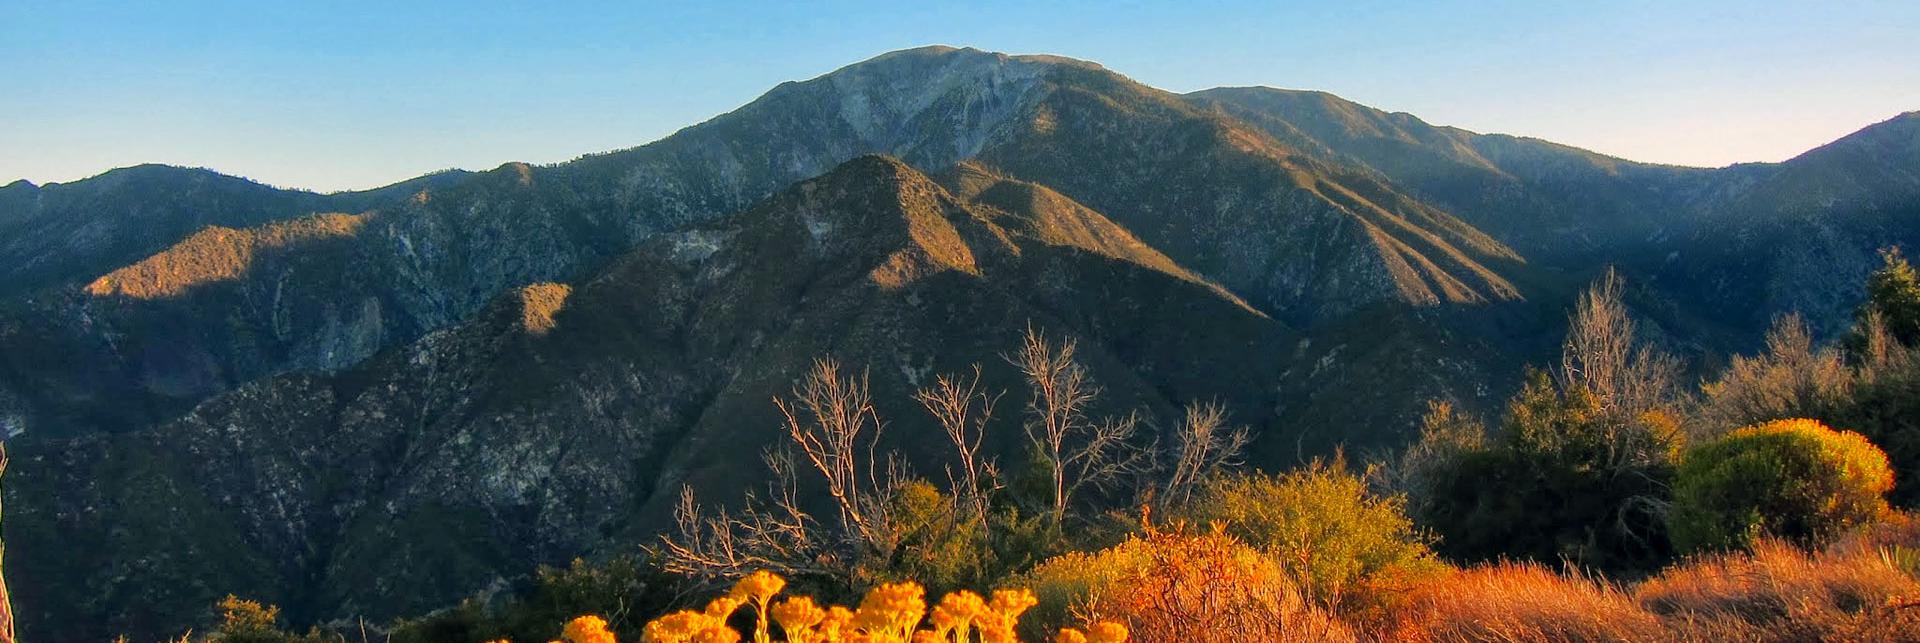 The Indigenous Dawn of the San Gabriel Mountains